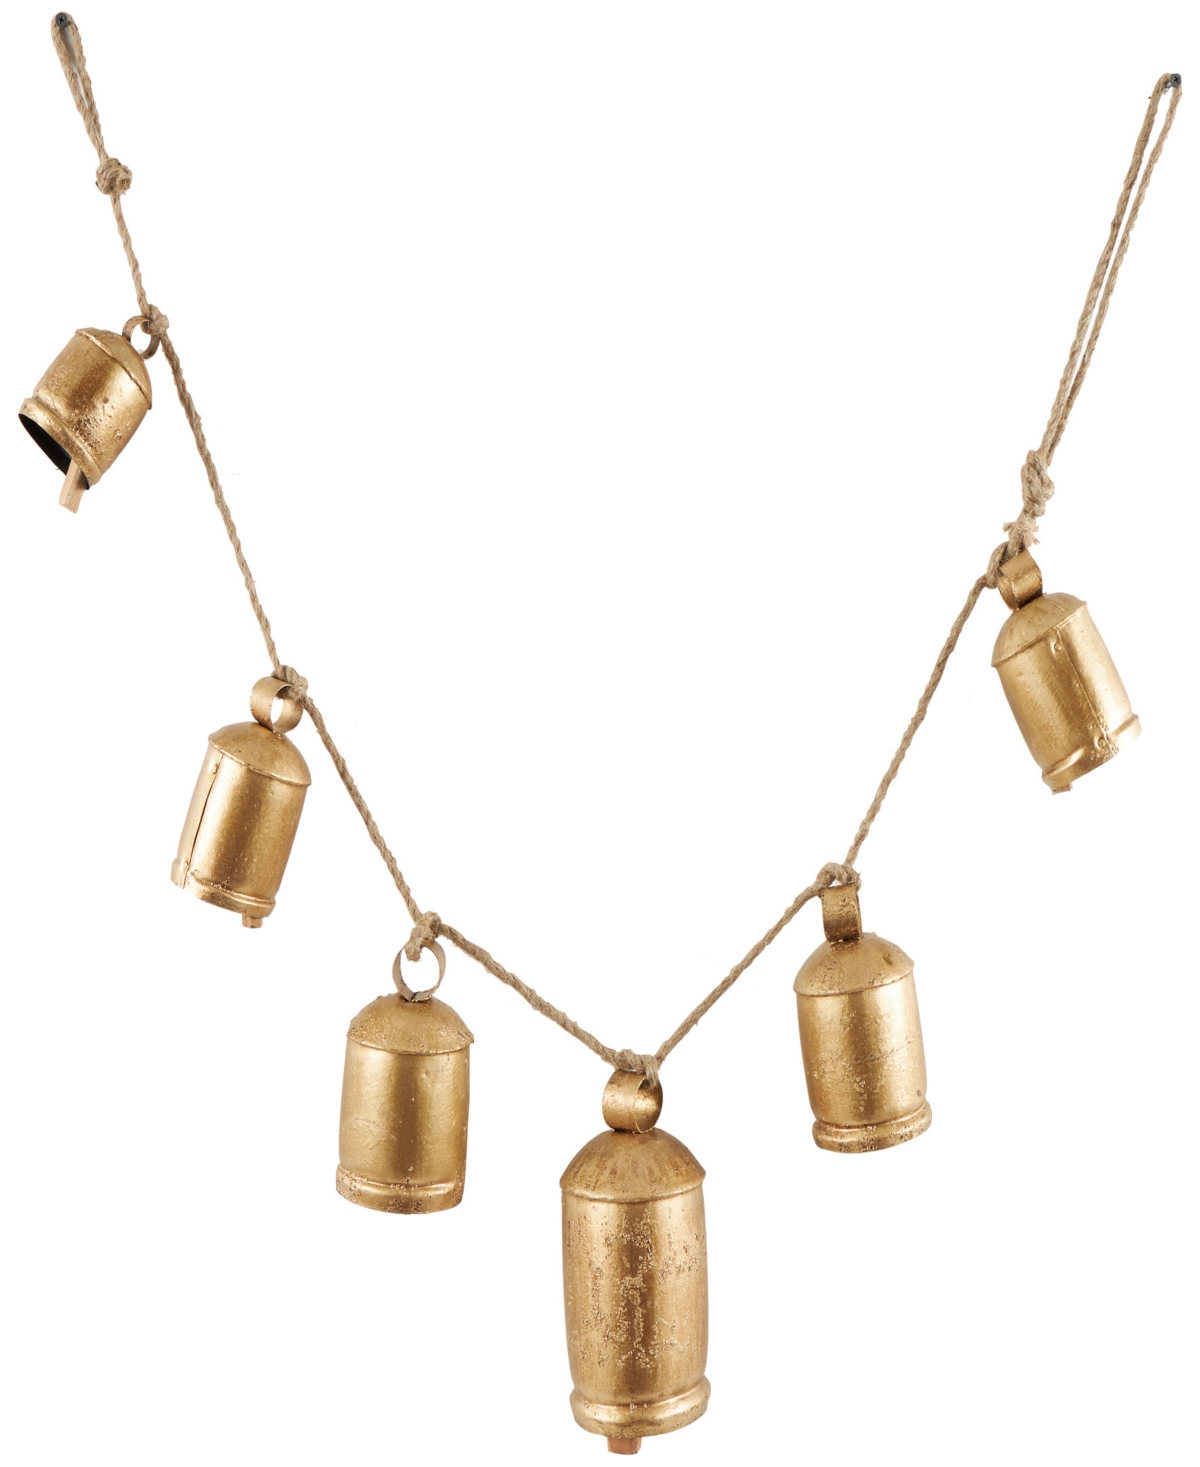 Rosemary Lane Metal Tibetan Inspired String Hanging Decorative Cow Bell With Jute Hanging Rope, 52" X 4" X 8" In Gold